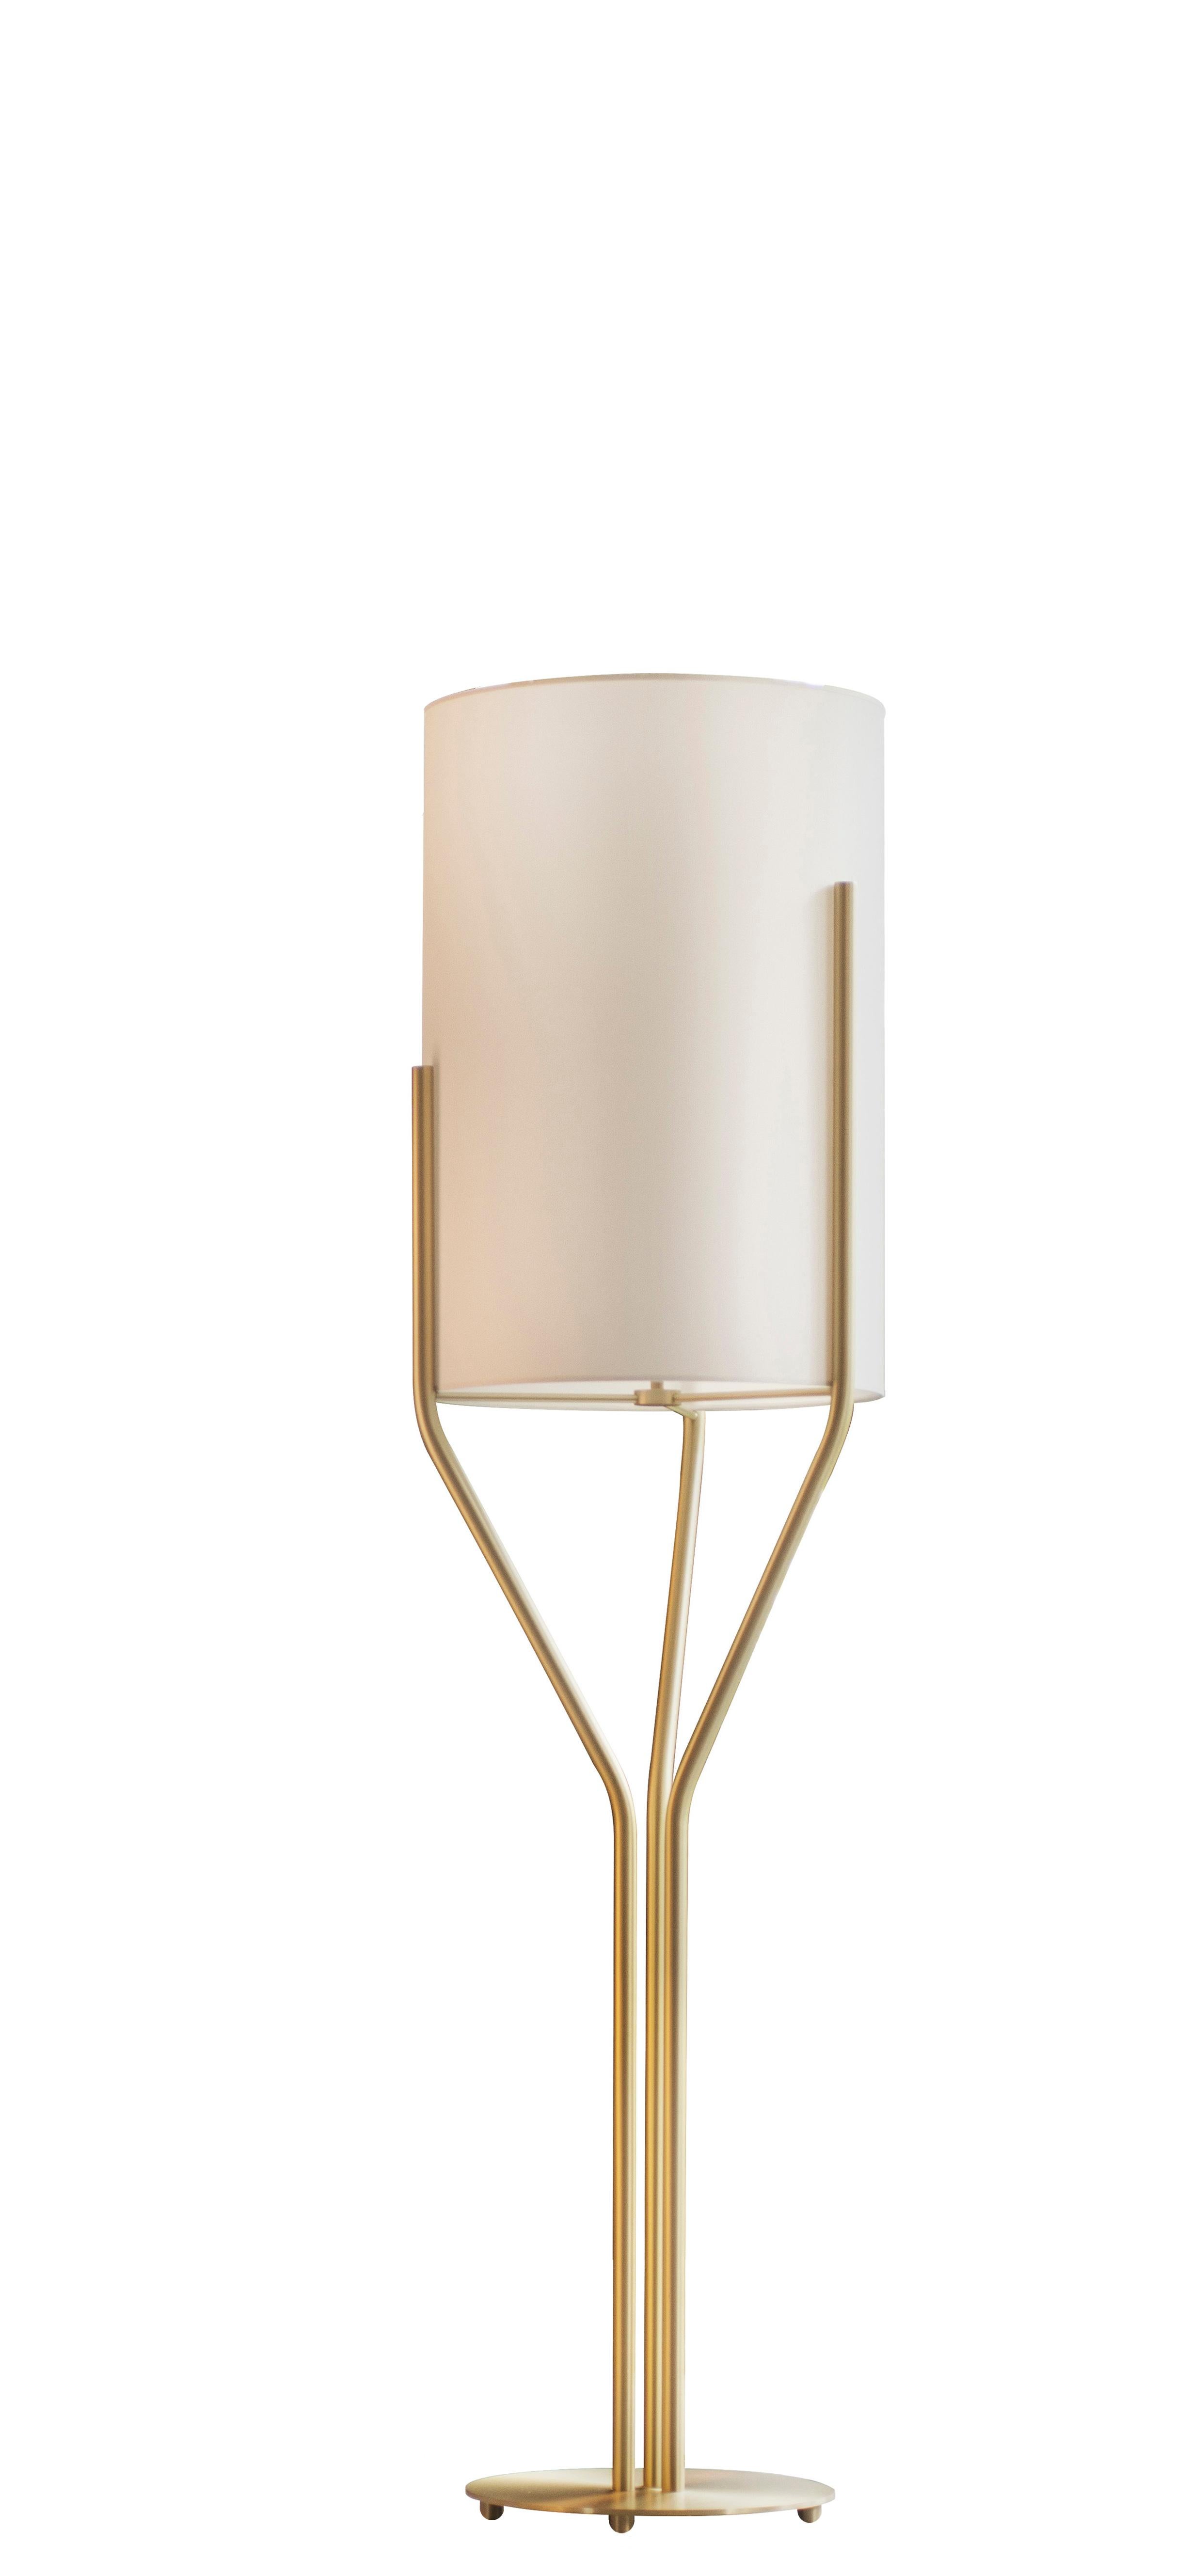 Arborescence L satin brass floor lamp by Hervé Langlais
Dimensions: D40 X H150 cm
Materials: solid brass, Lampshade drop paper® M1, black textile cable (2m).
Others finishes and dimensions are available. 

All our lamps can be wired according